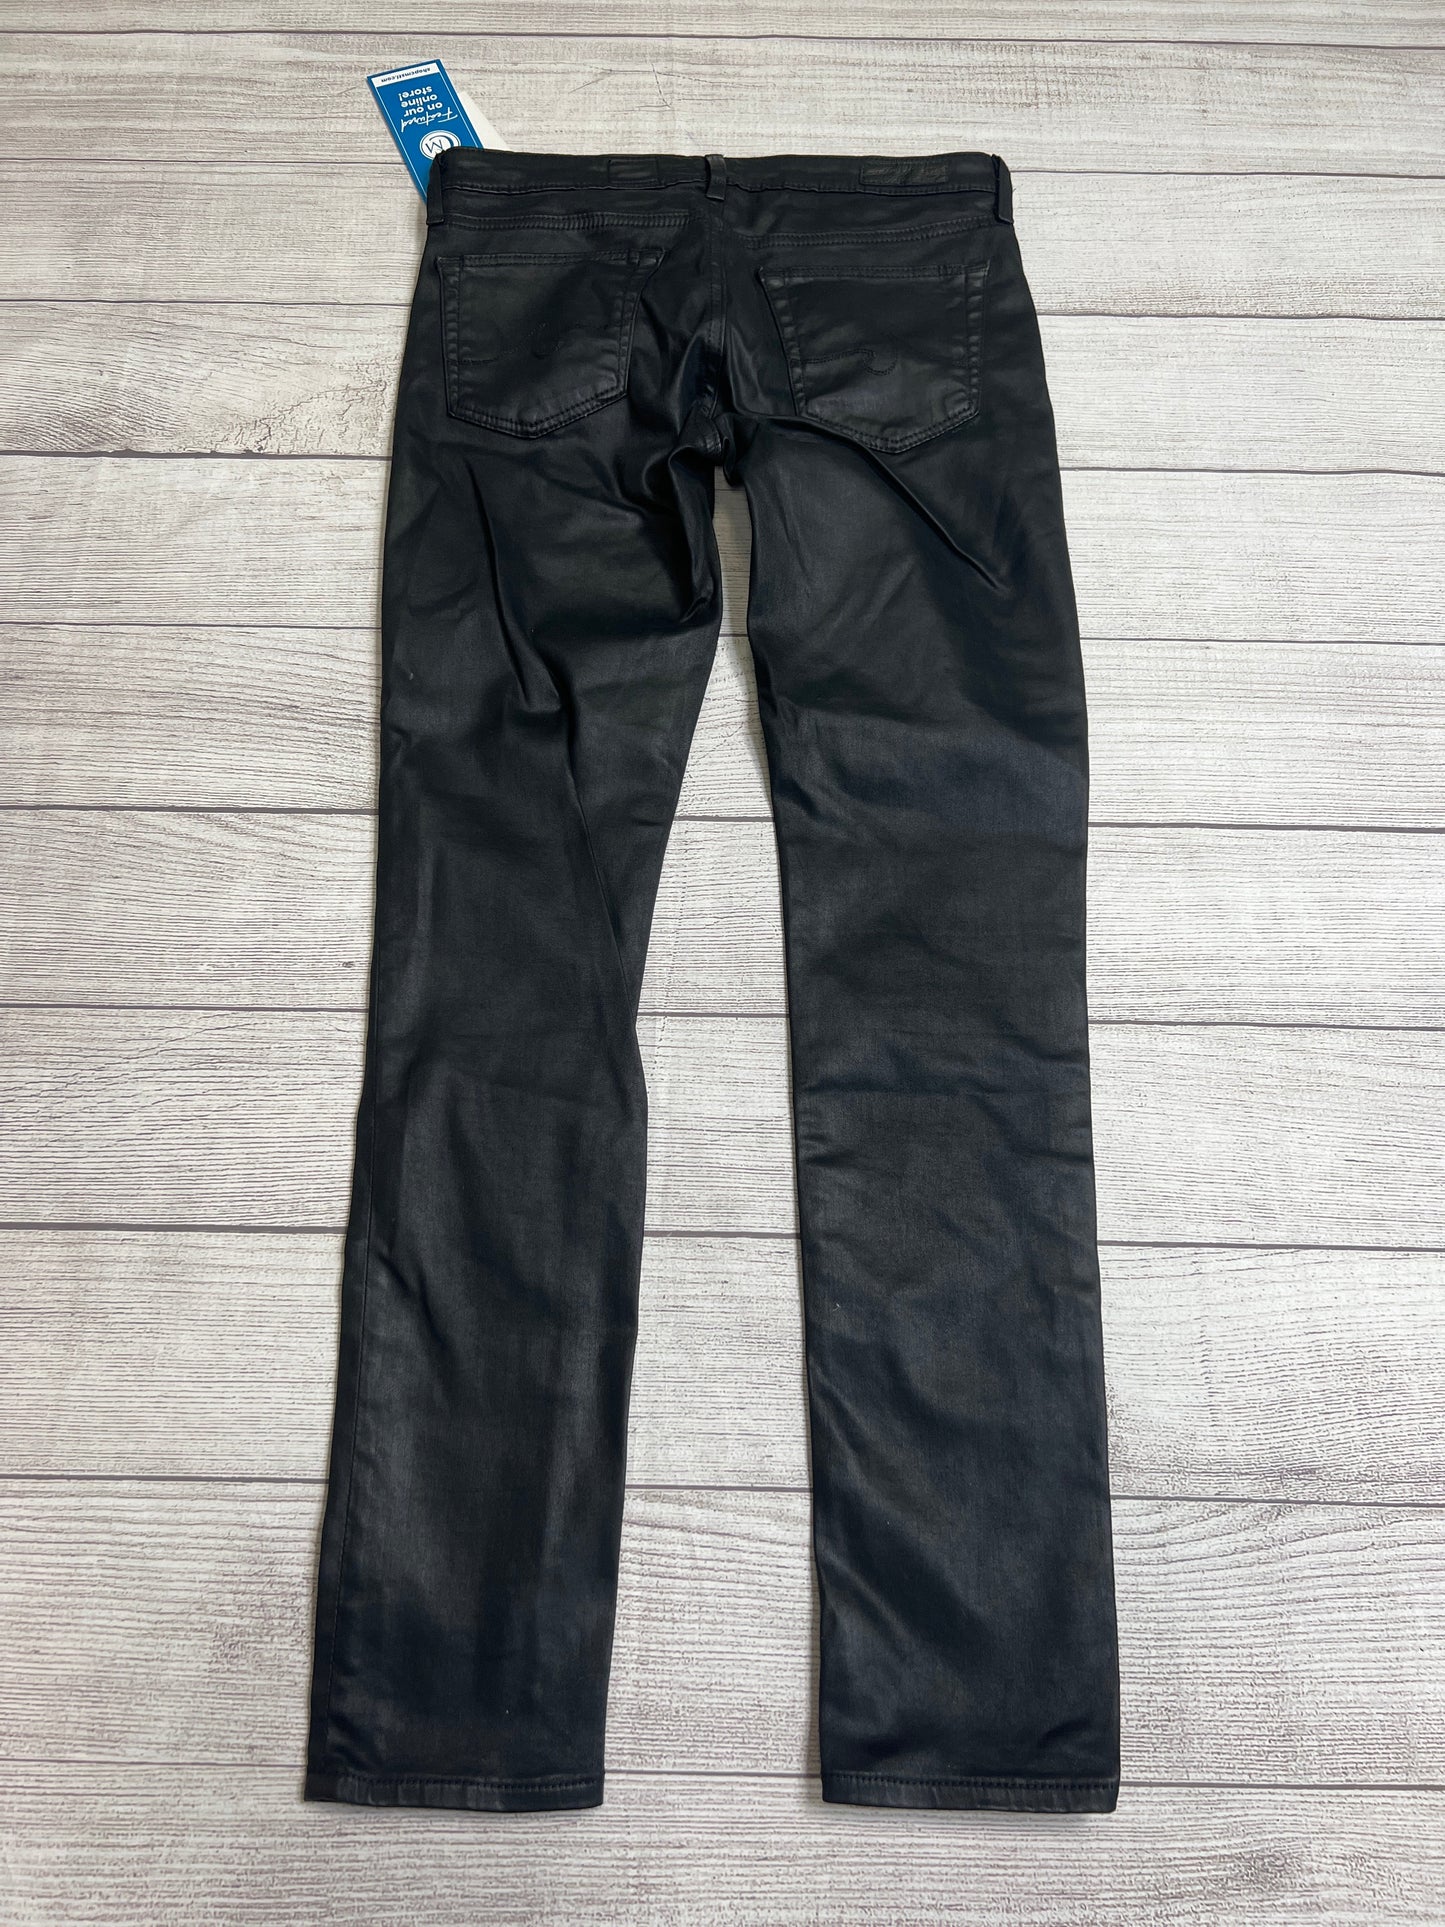 Jeans Designer By Adriano Goldschmied  Size: 4/26